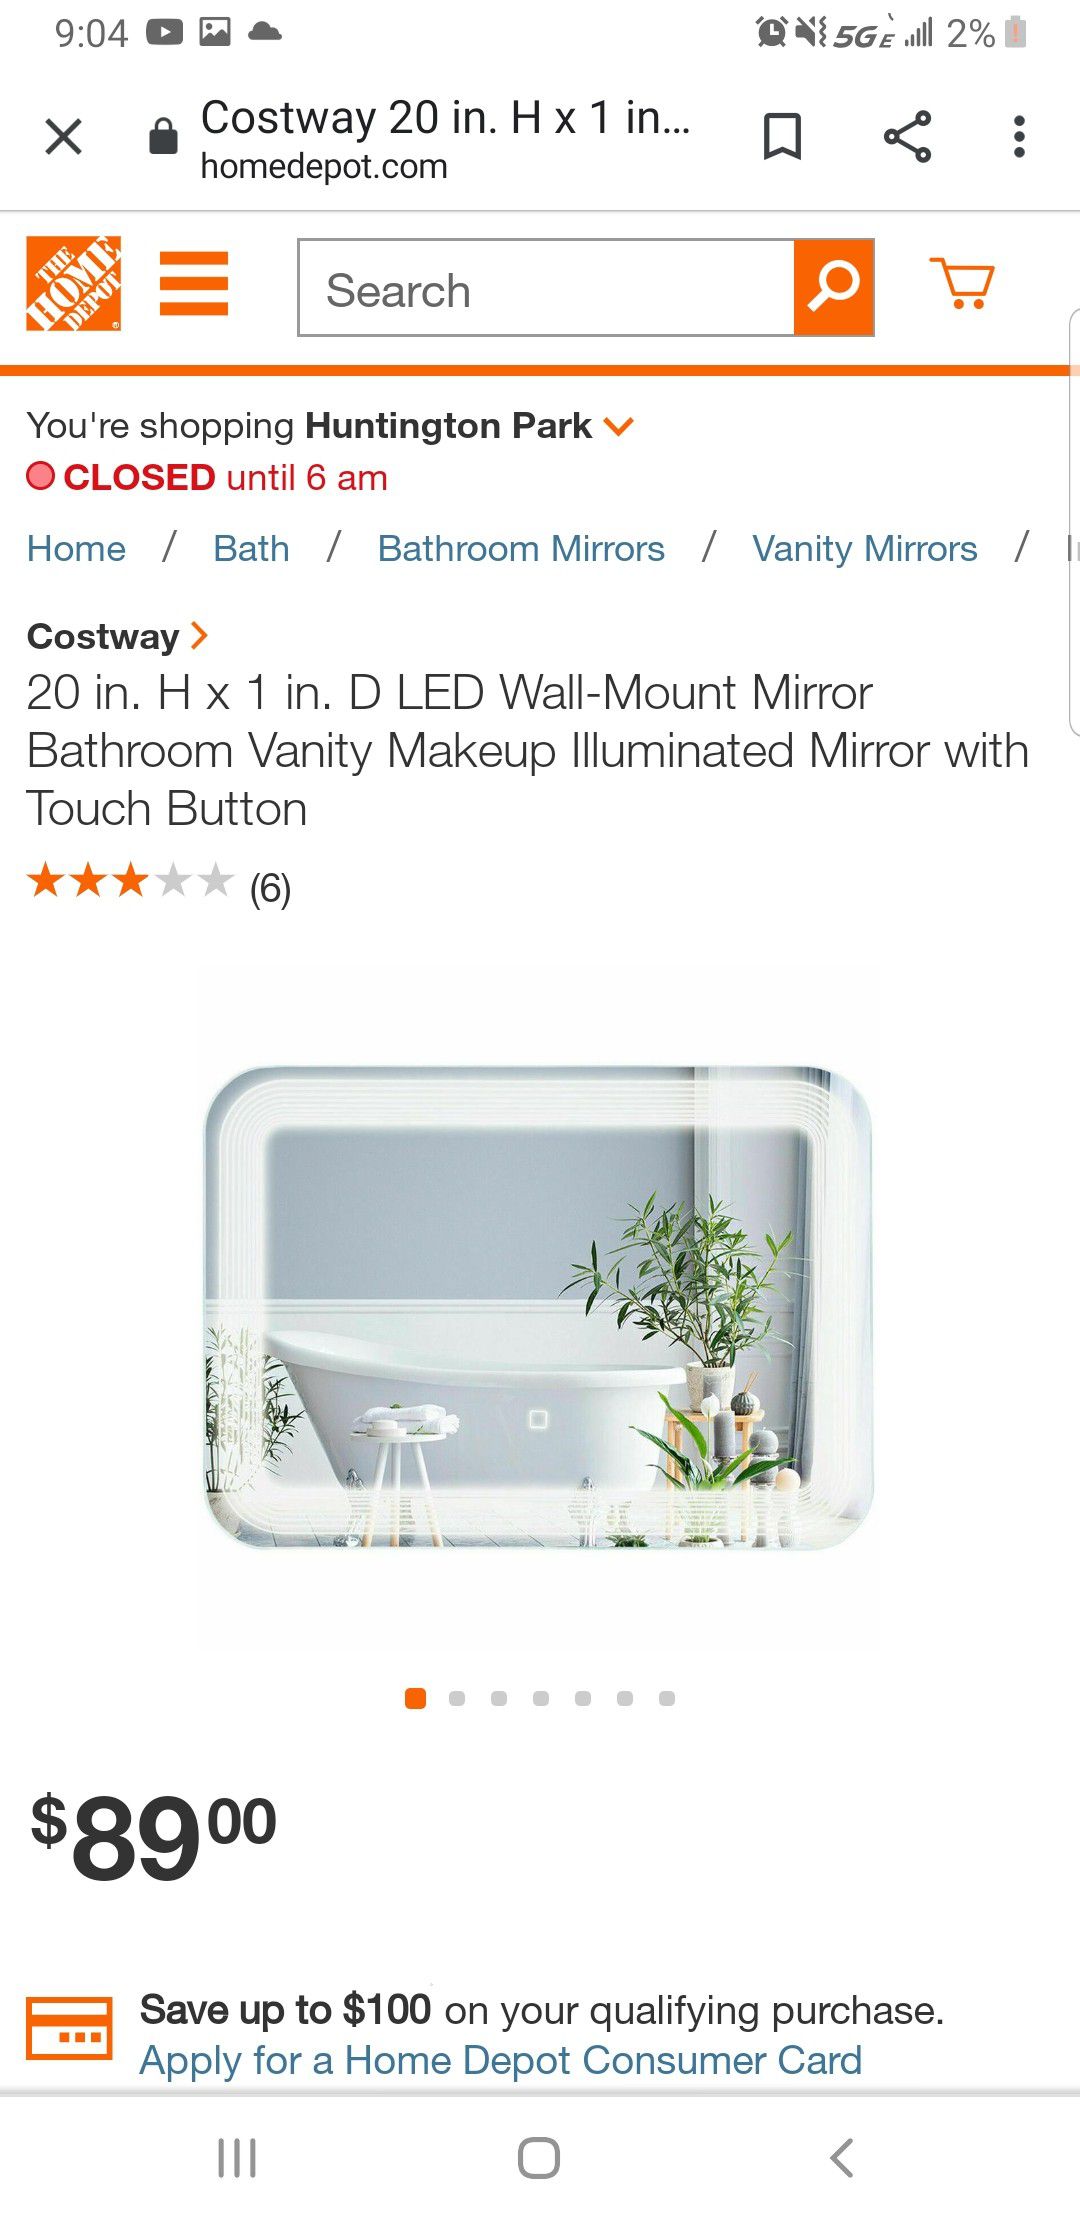 20 in. H x 1 in. D LED Wall-Mount Mirror Bathroom Vanity Makeup Illuminated Mirror with Touch Button Retails 90 asking 50 obo!!! New